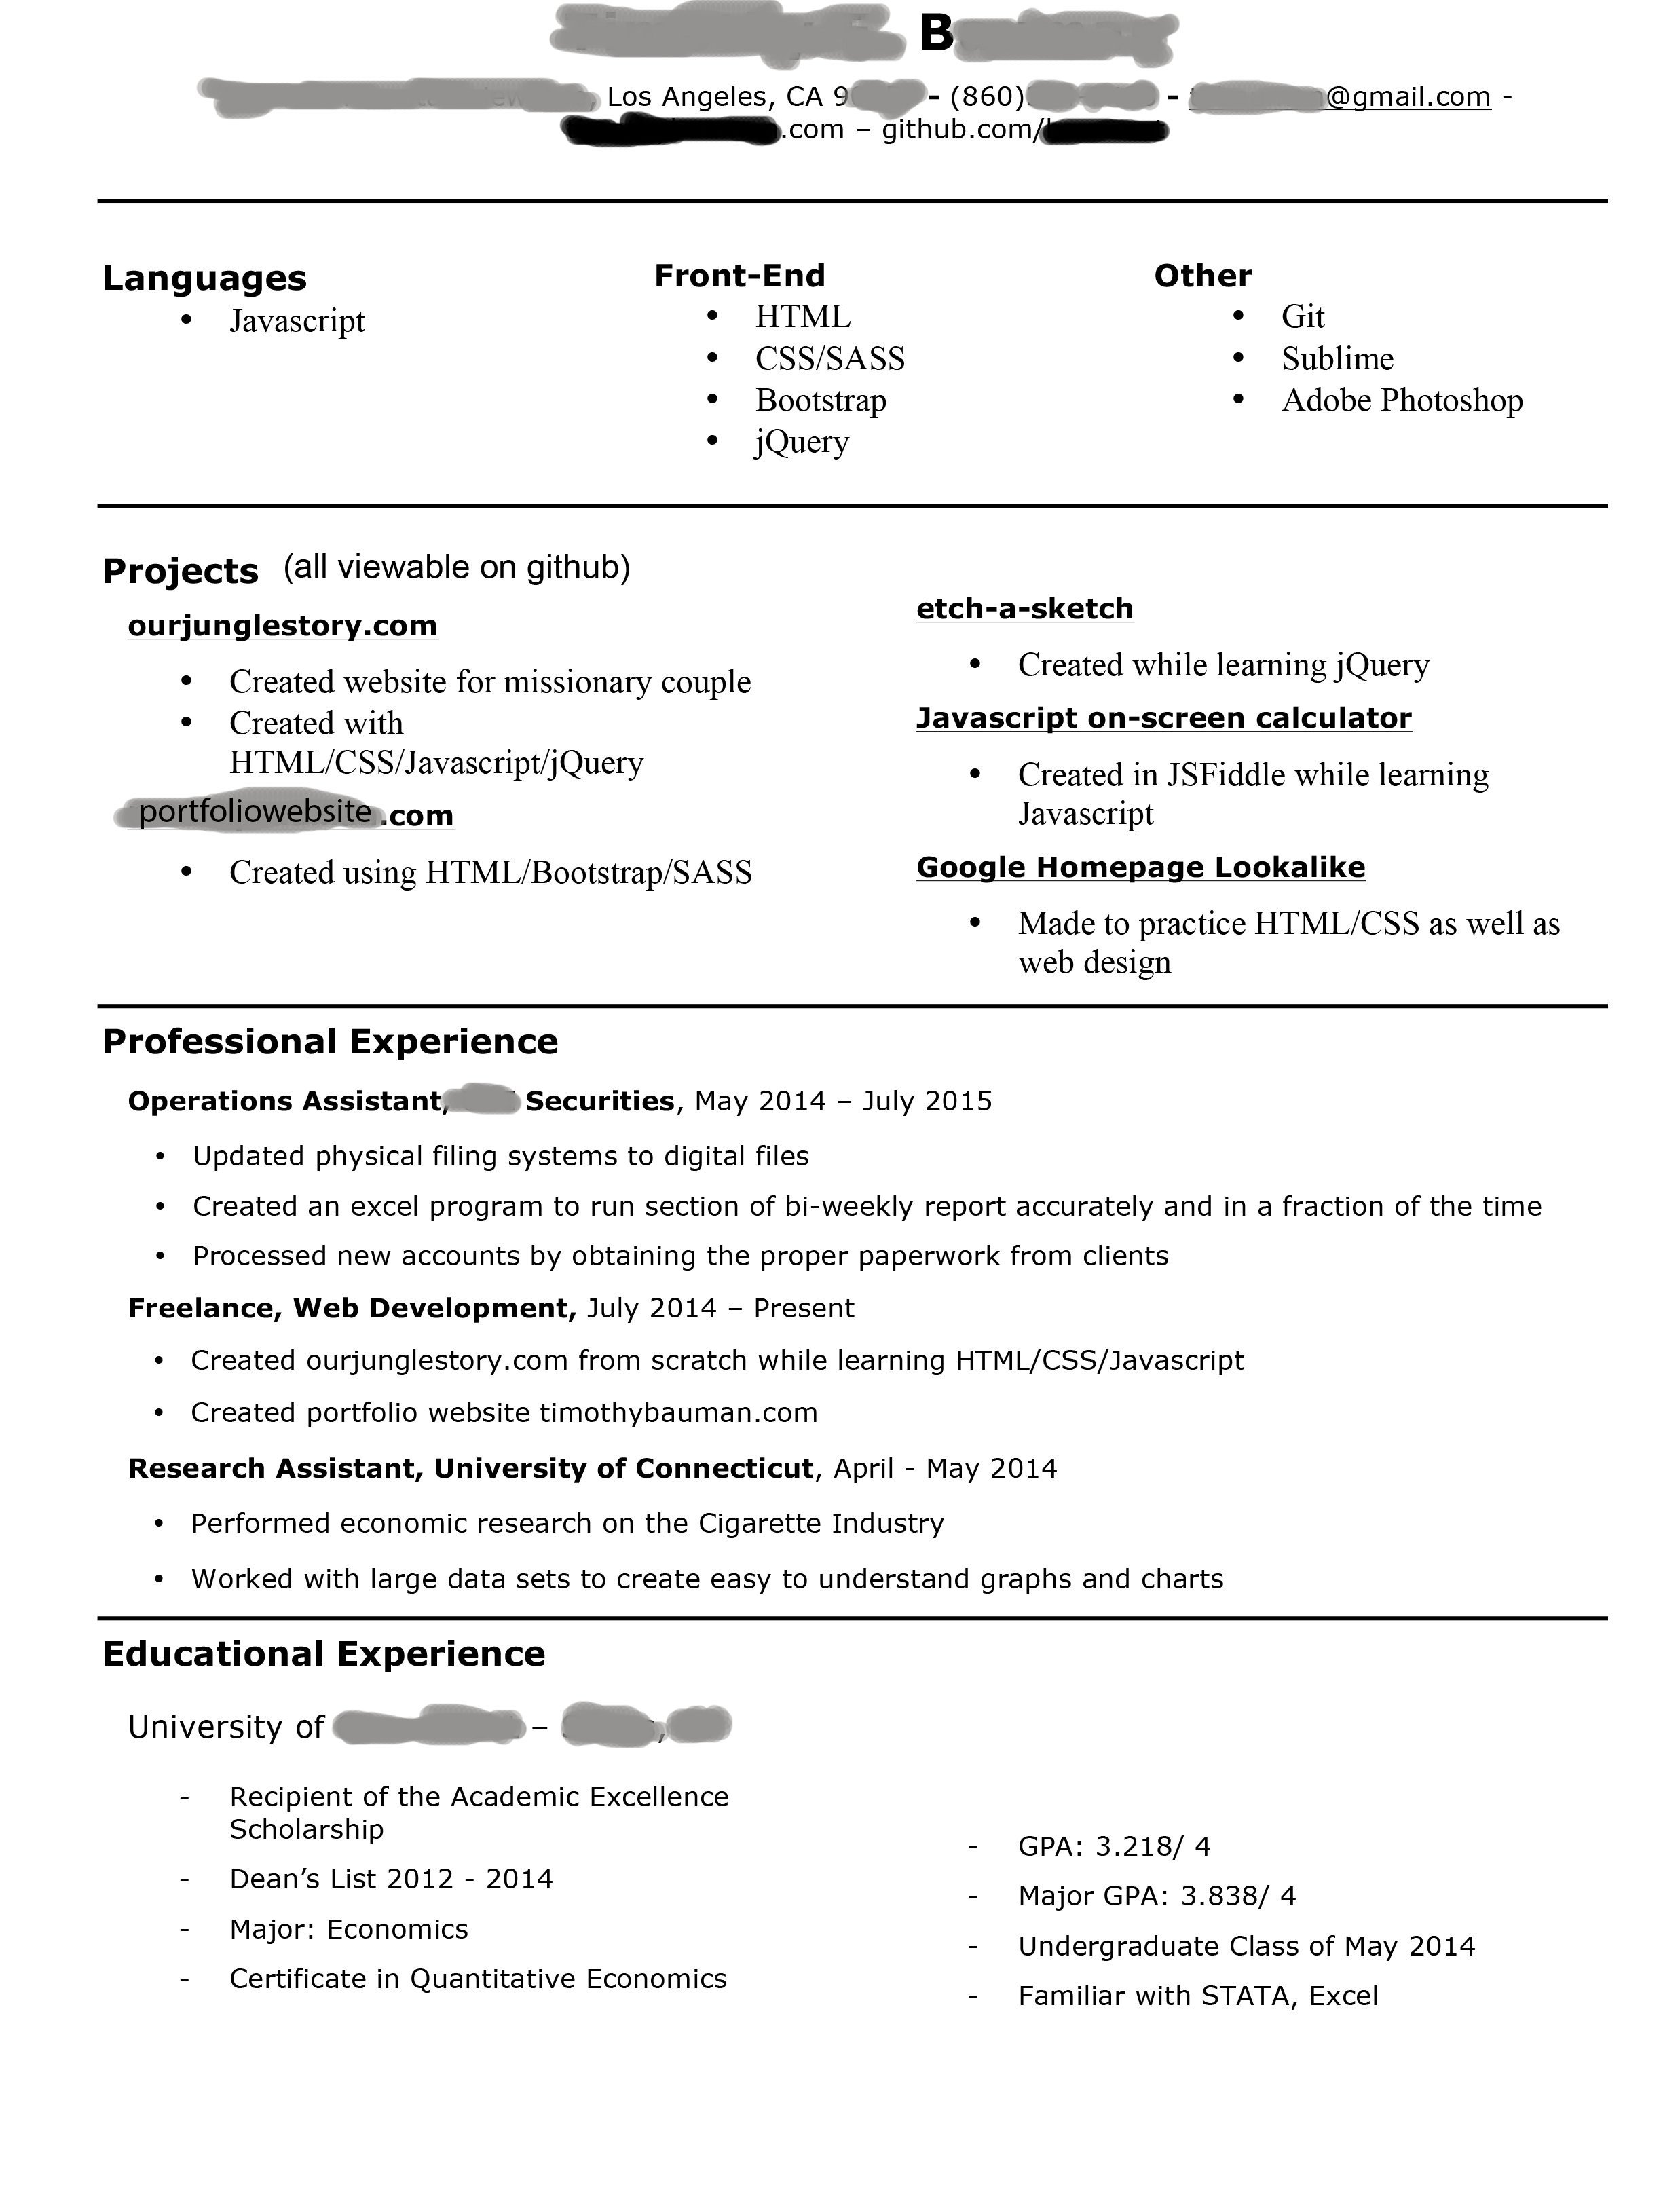 Starting to look for jobs as a jr front end web developer